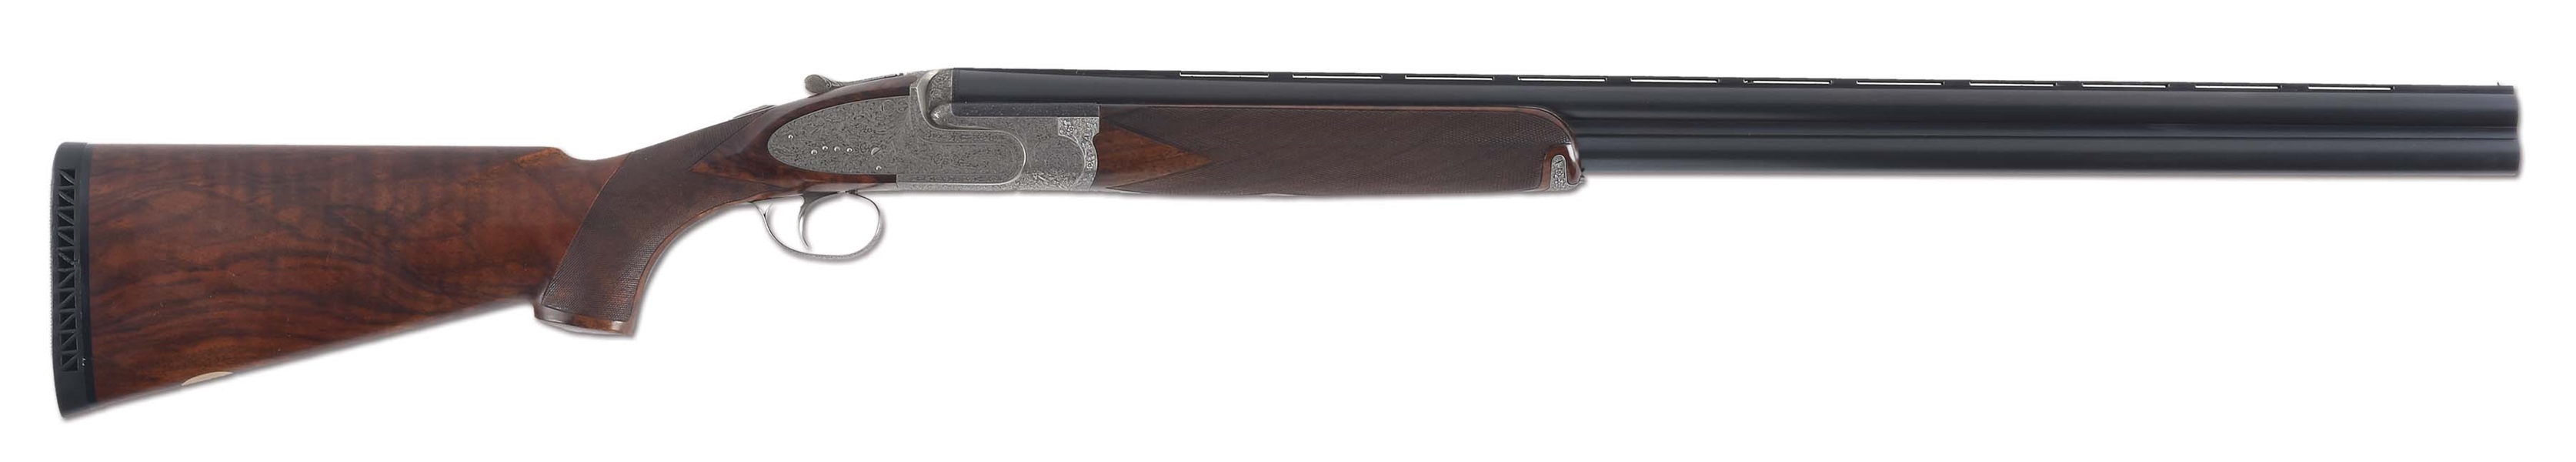 (M) IVO FABBRI TIPPO PICCONE EXTRA OVER/UNDER SHOTGUN WITH CASE.